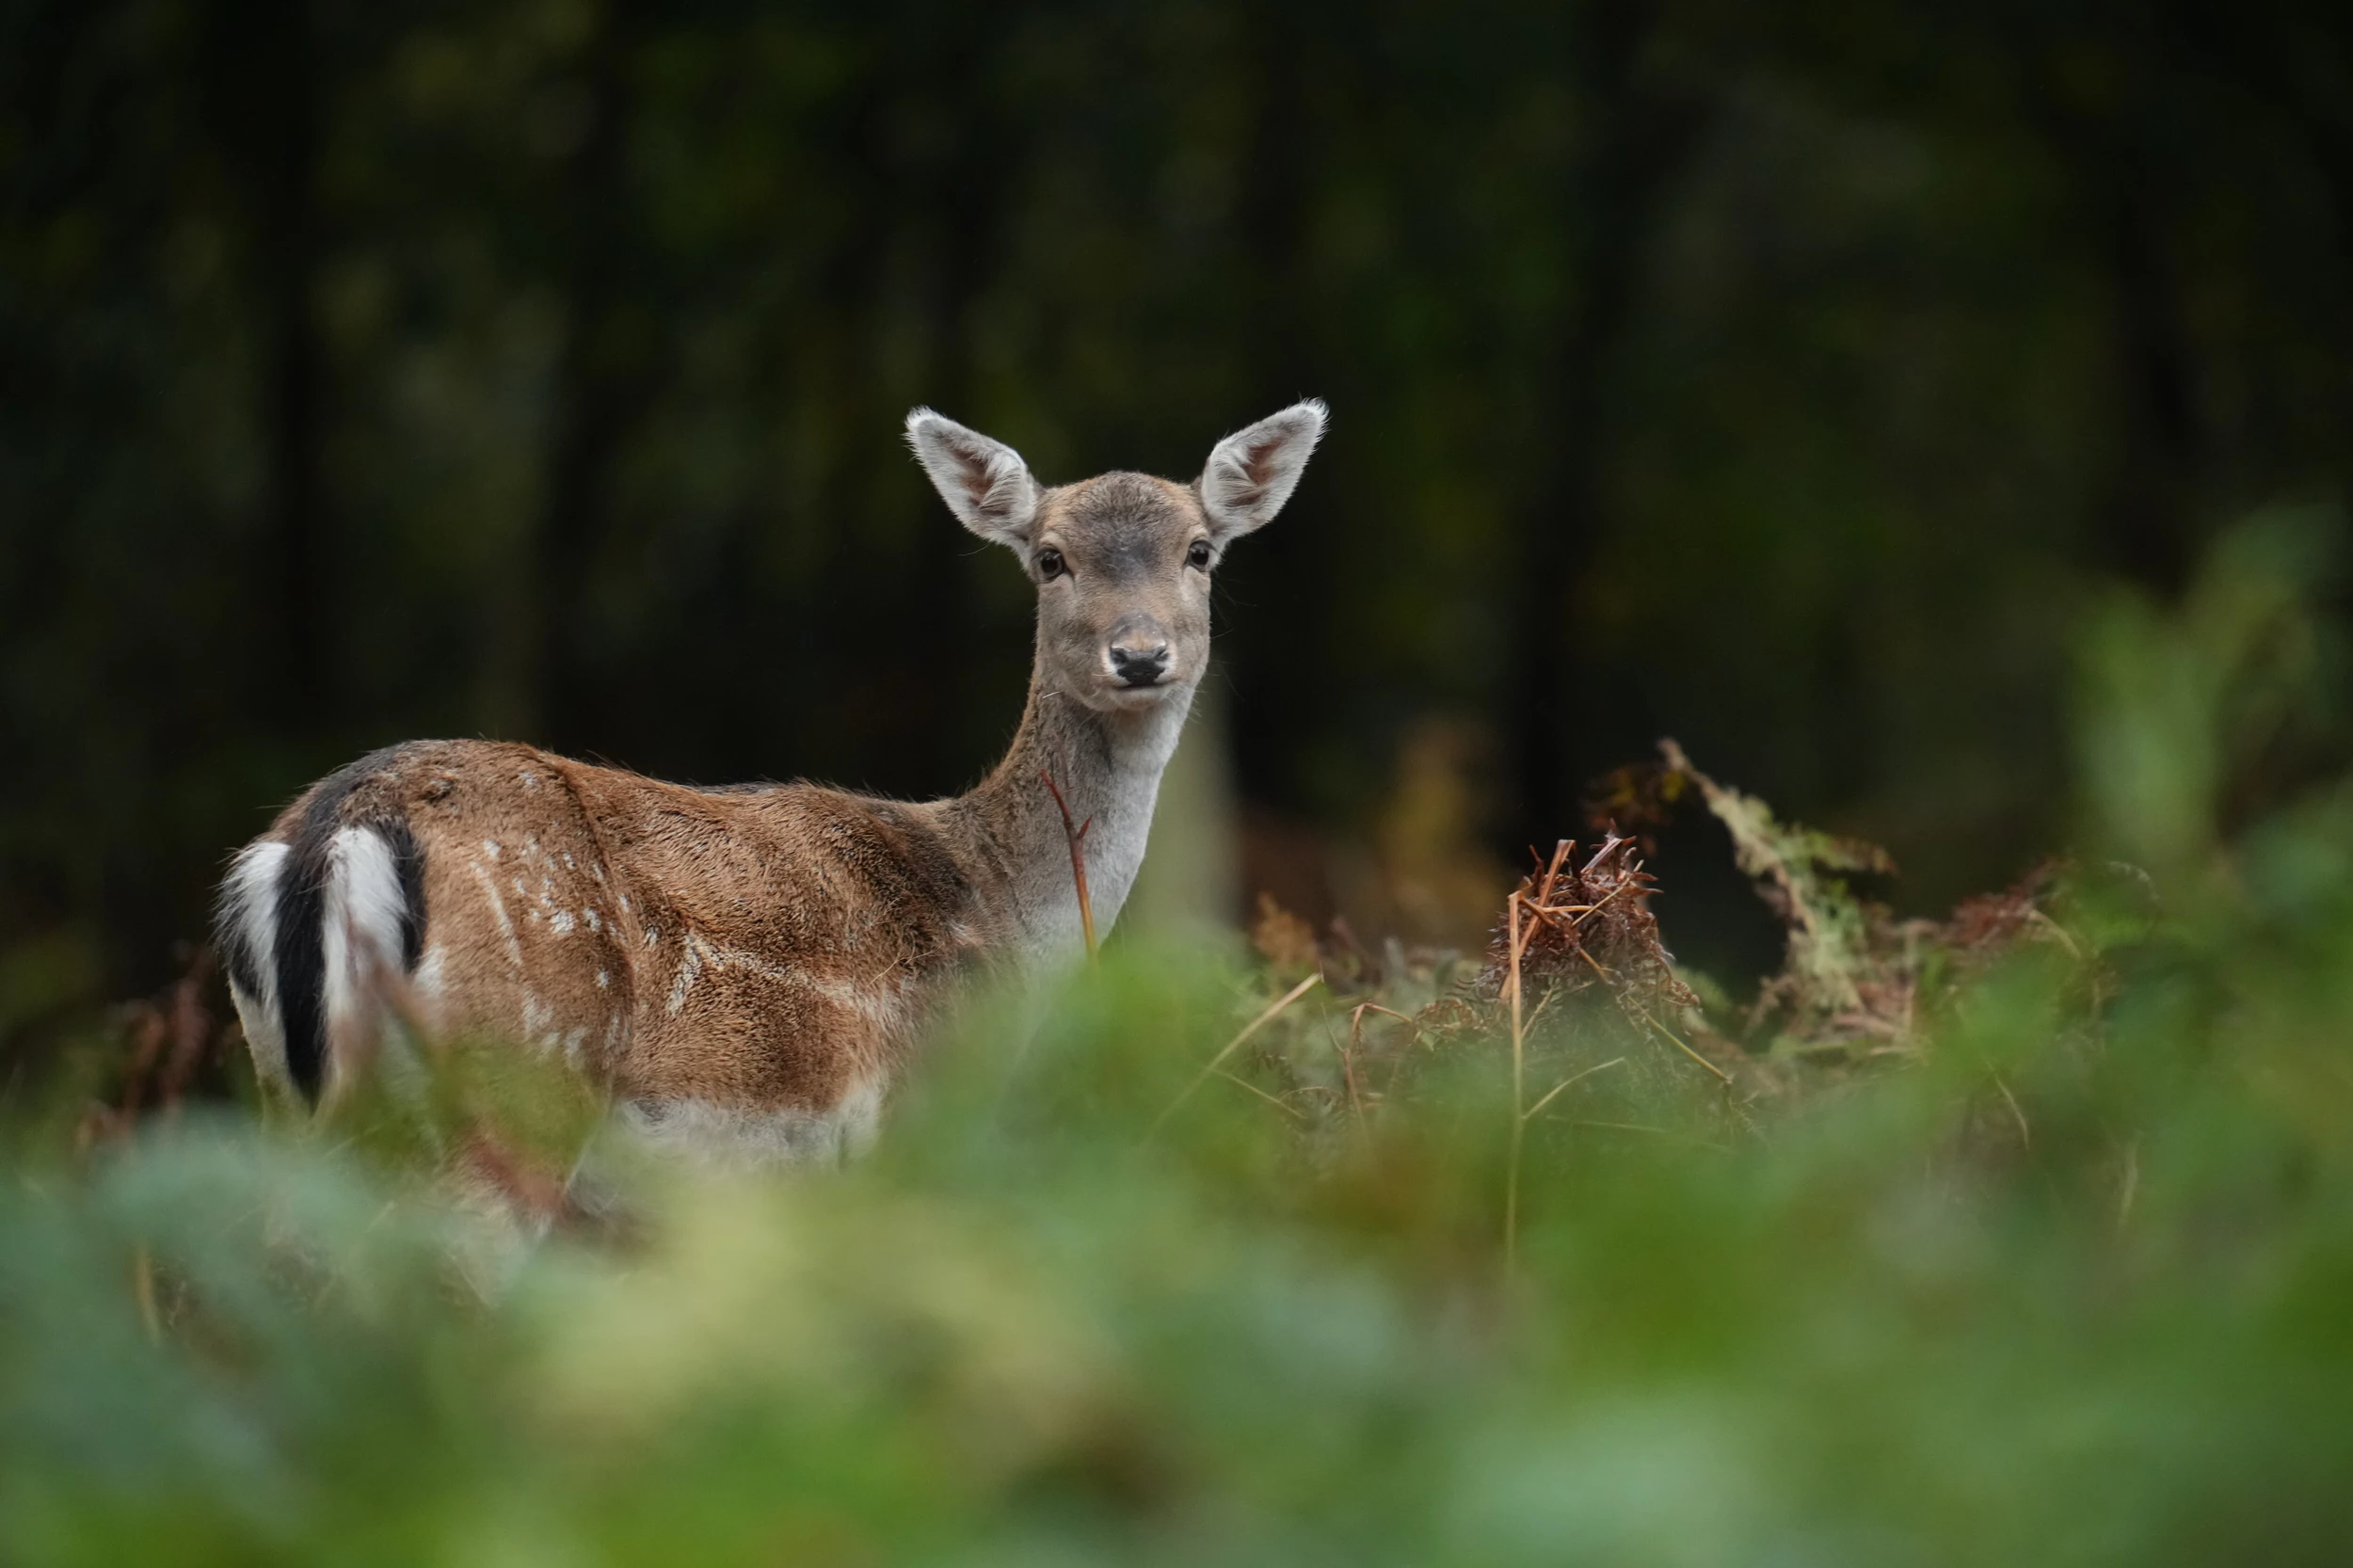 South Jersey Woman Dies When Deer Crashes Through her